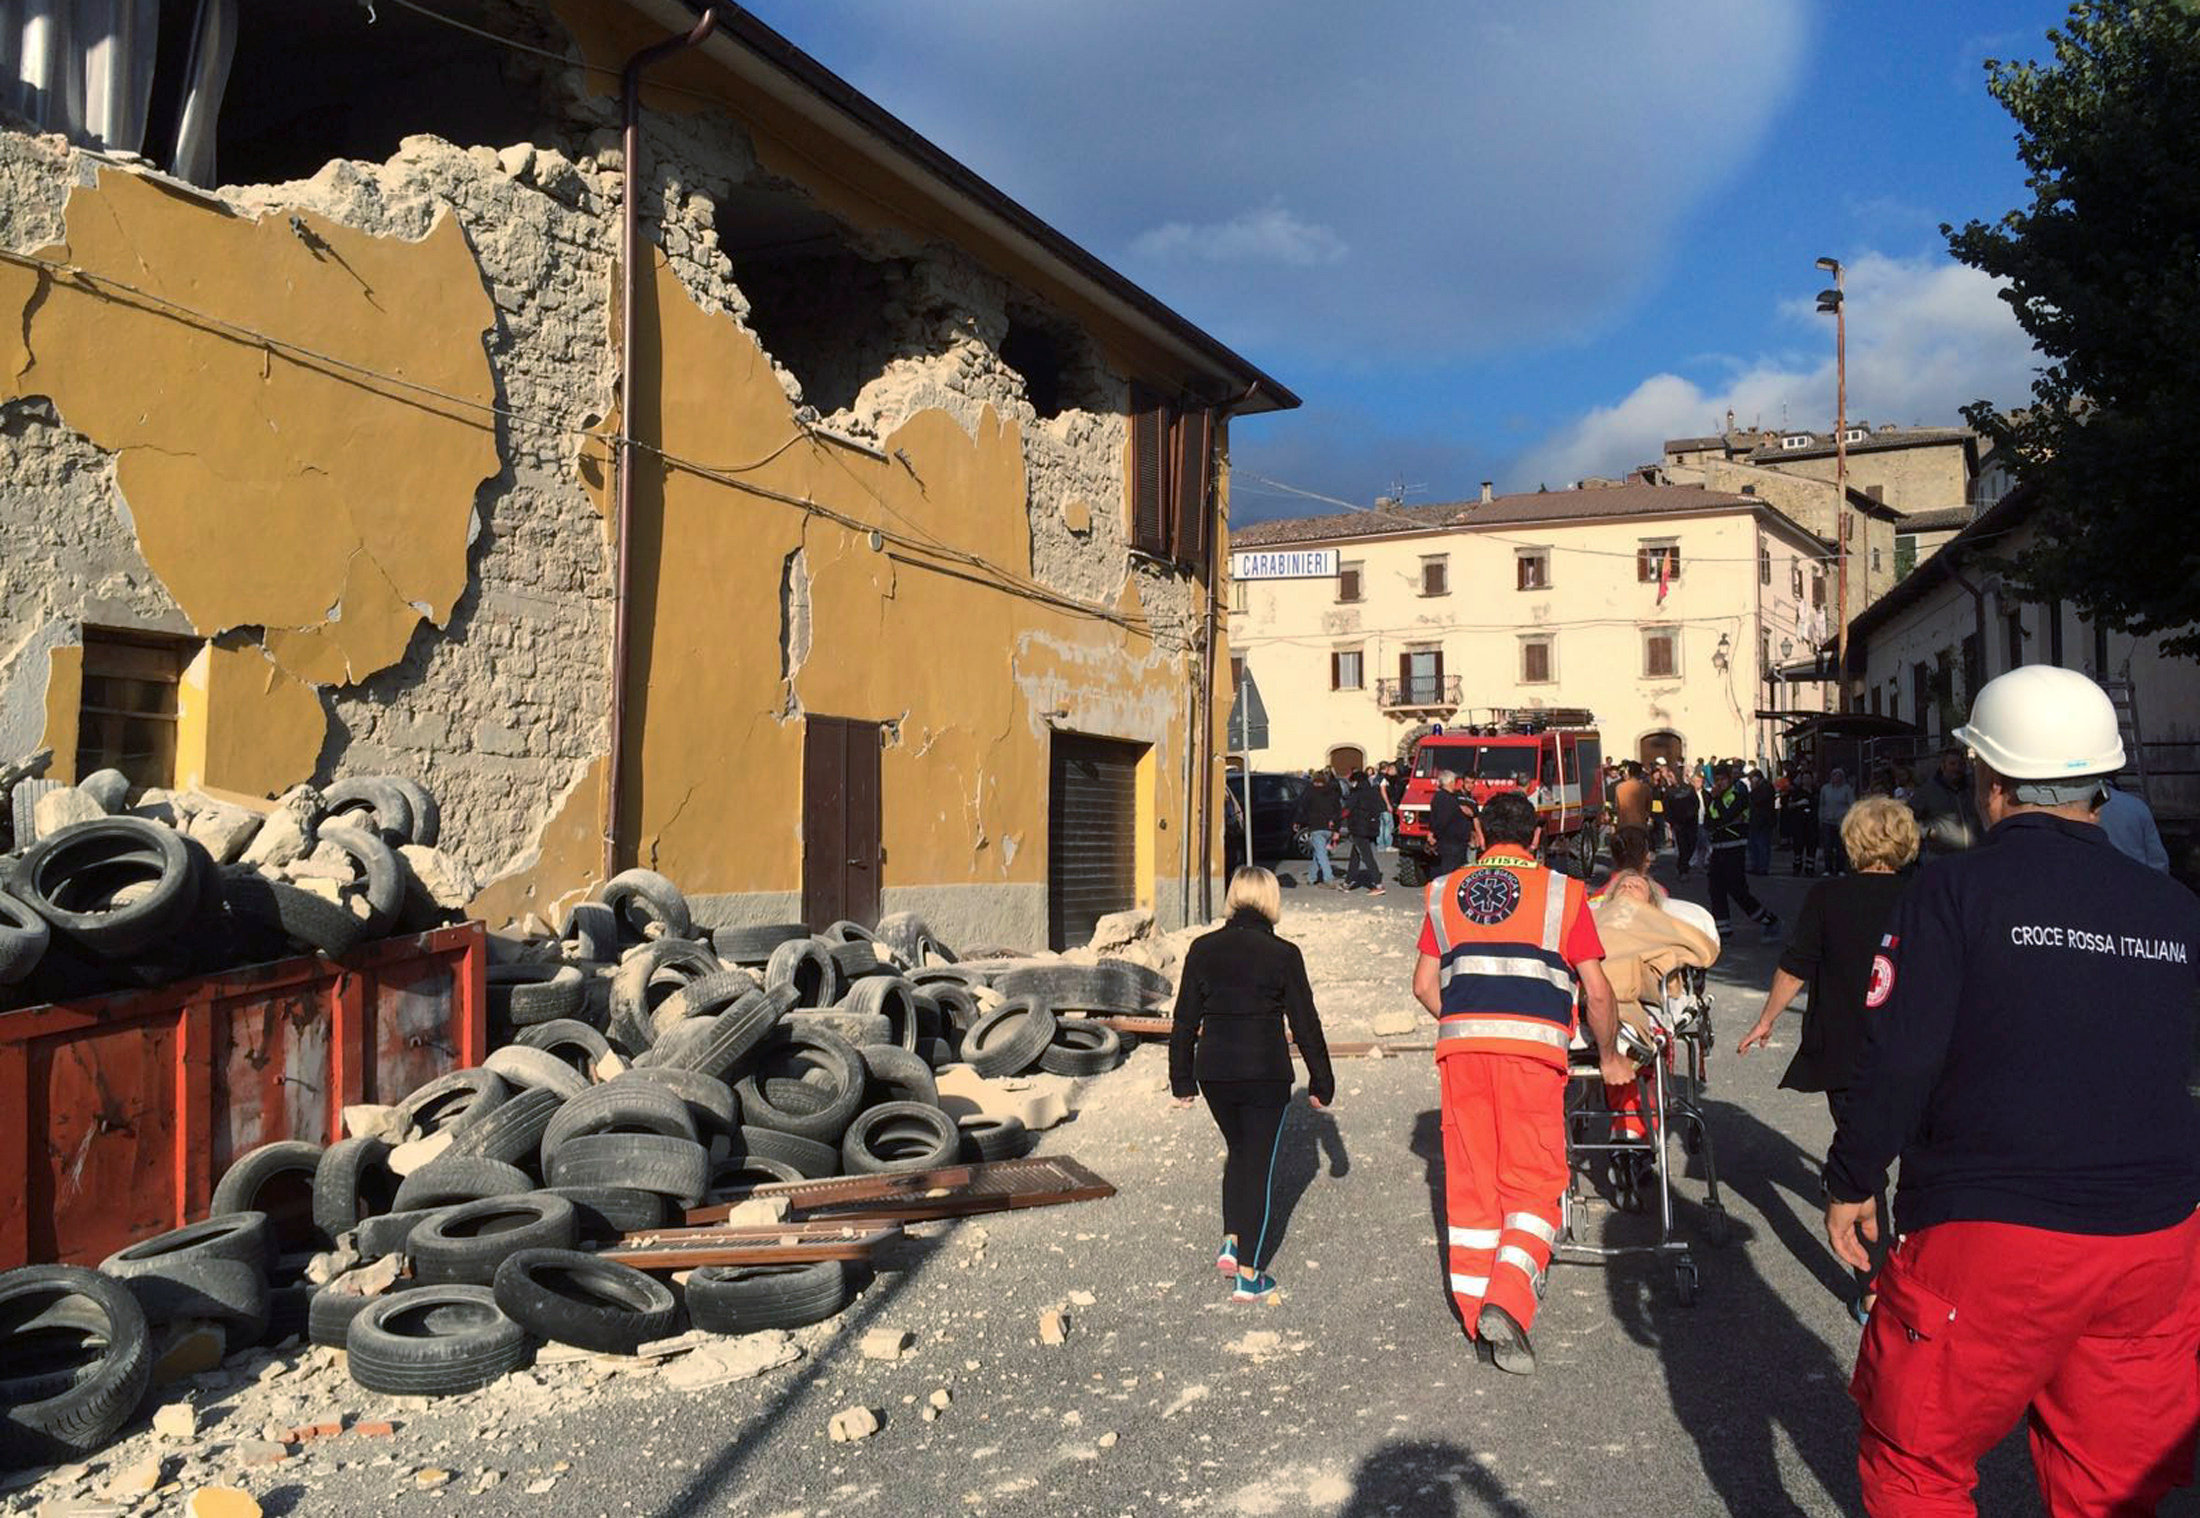 PHOTO: Rescuers and people walk along a road following an earthquake in Accumoli di Rieti, central Italy, Aug. 24, 2016.